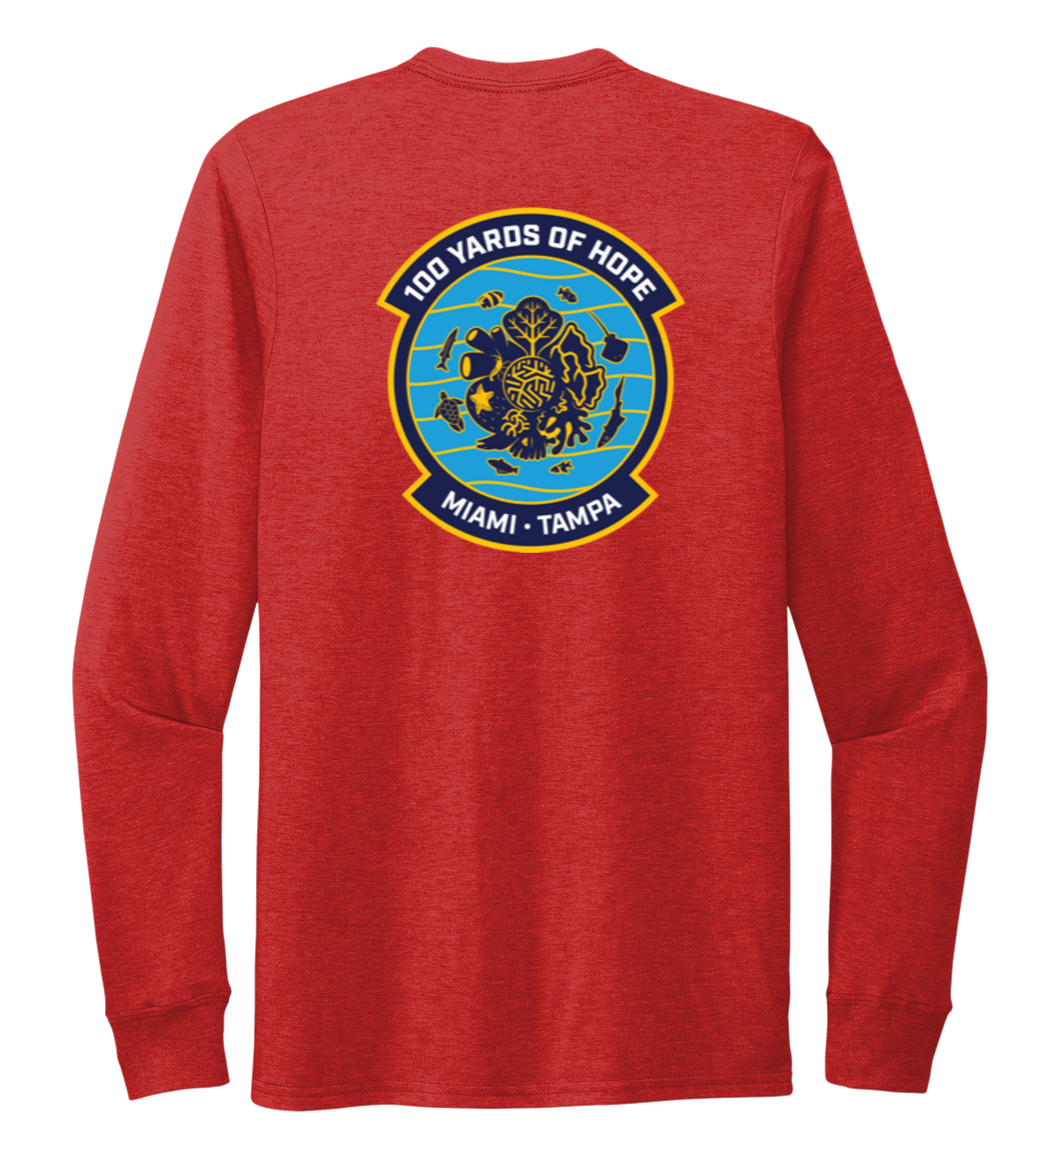 FORCE BLUE 100 YARDS OF HOPE Unisex Crew Neck Long Sleeve T-shirt in Bravo Red